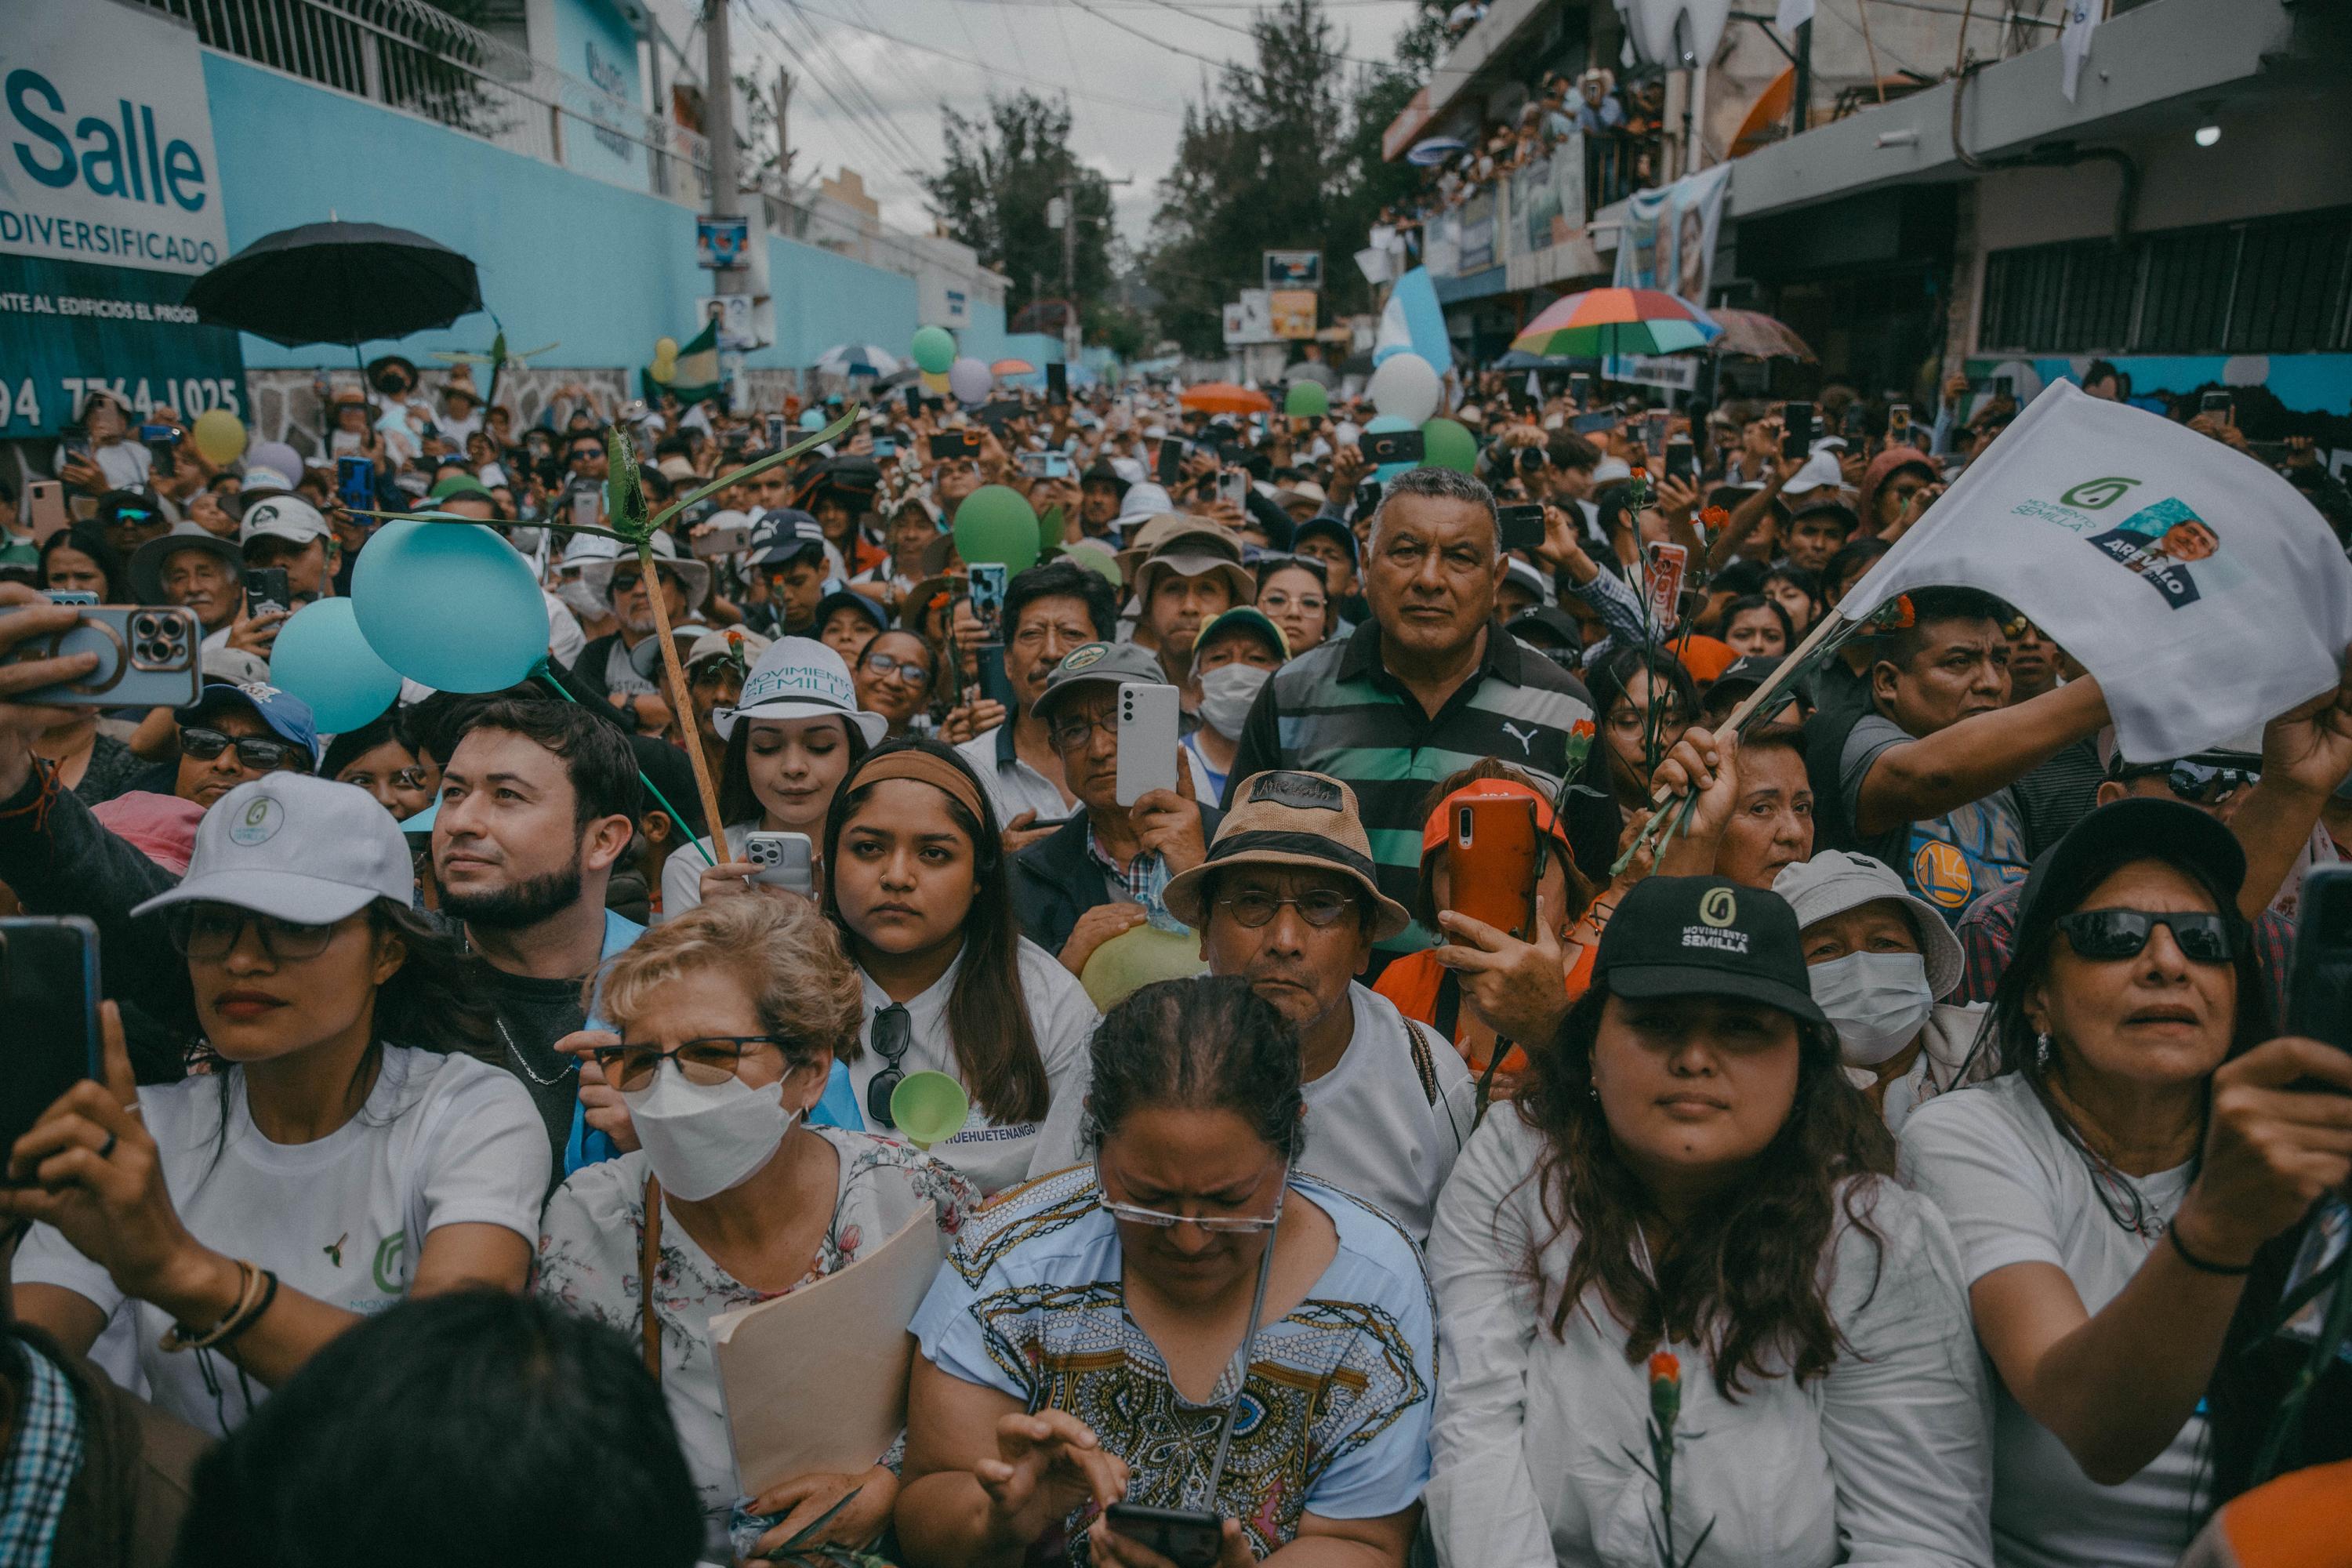 Bernardo Arévalo attends a campaign rally in Huehuetenango, 216 kilometers outside the capital. Local leaders assert that this is where the 2015 protests began that led to the collapse of the government of Otto Pérez Molina. Photo Carlos Barrera